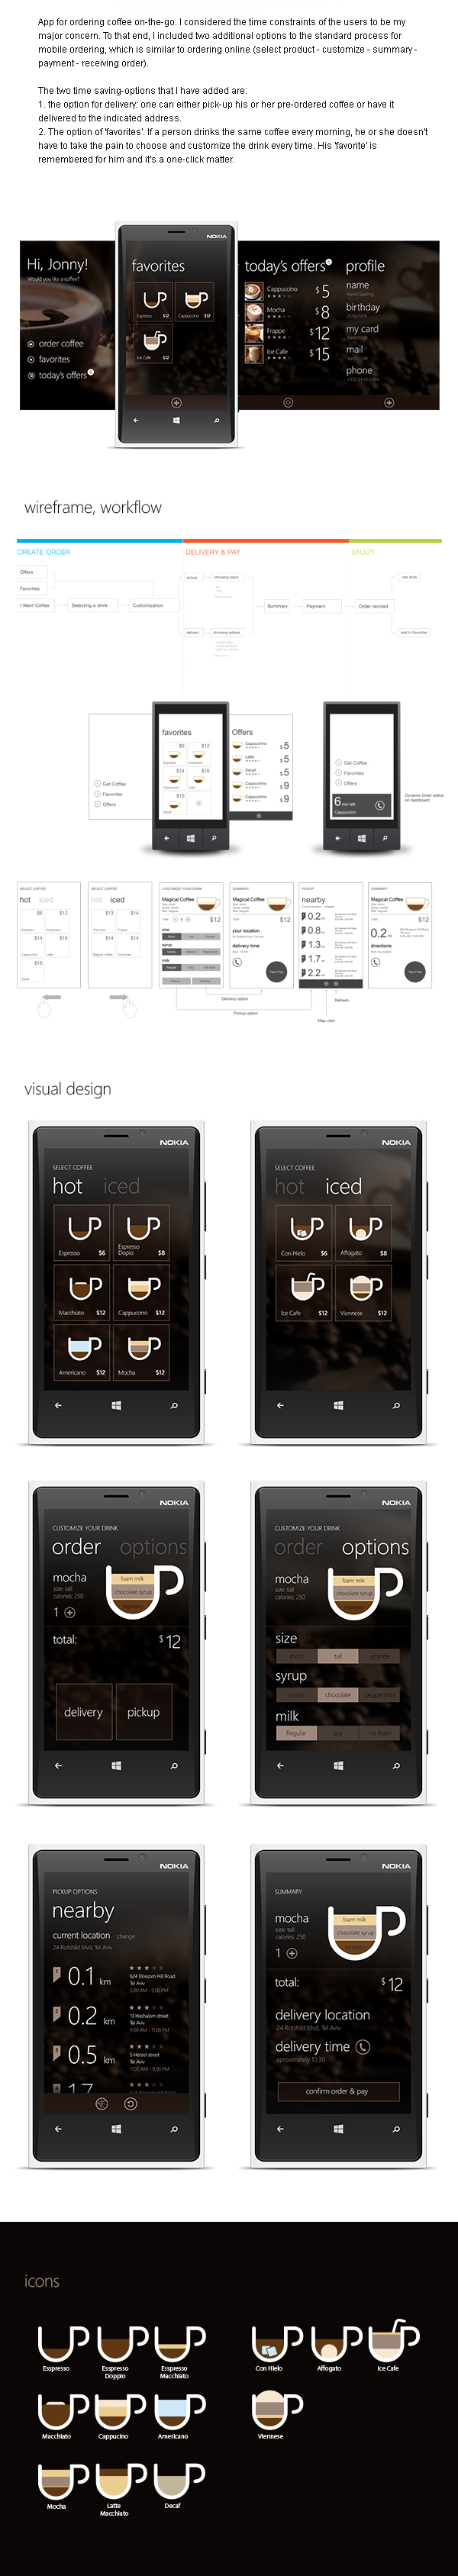 windows phone Coffee cafe Order app Windows 8 on-the-go application mobile metro UI ux interactive interaction